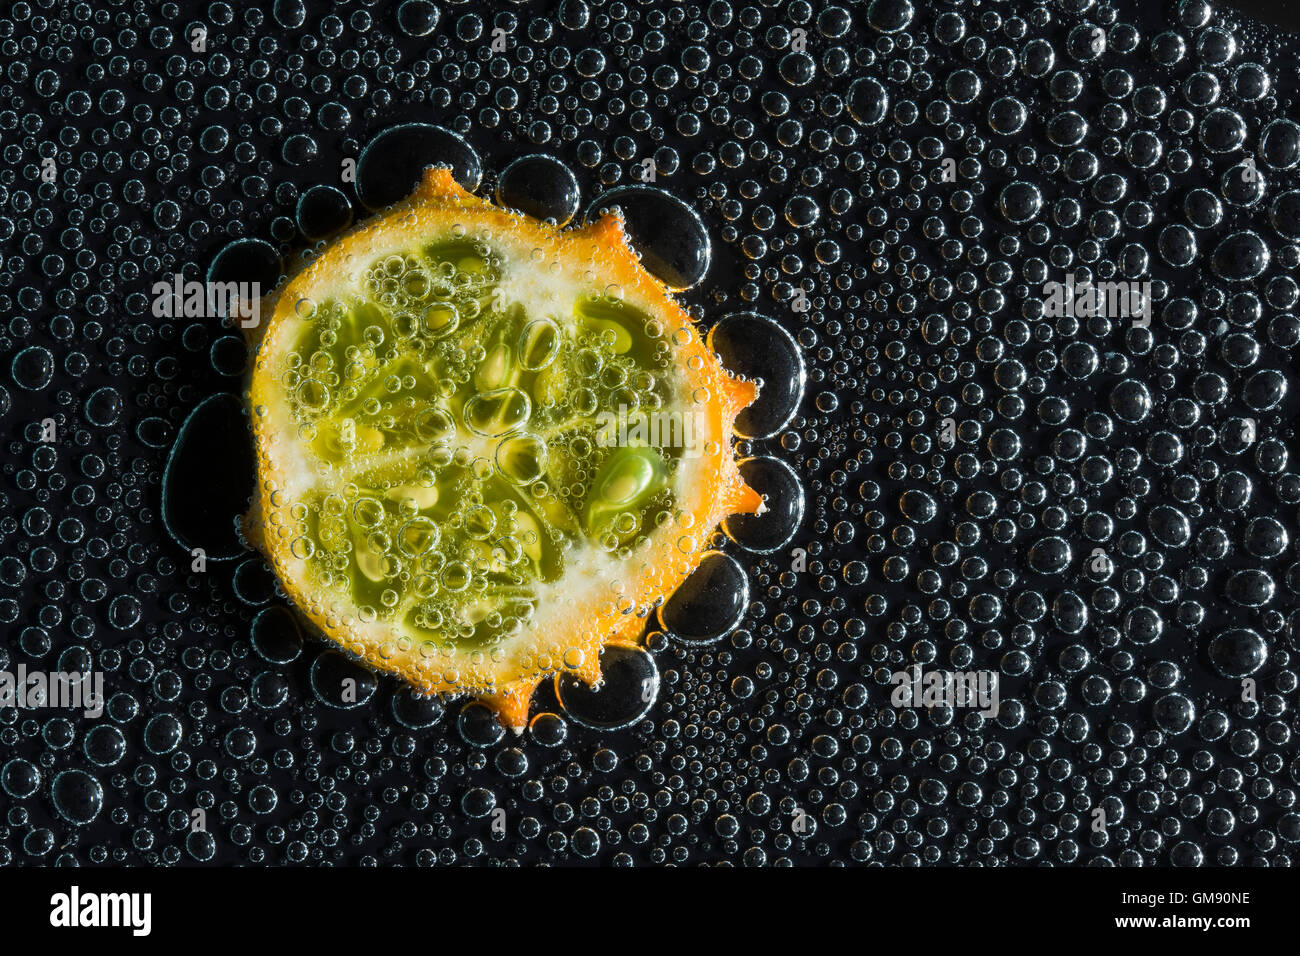 Kiwano, horned melon fruit in mineral water, a series of photos. Close-up carbonated water against black background Stock Photo